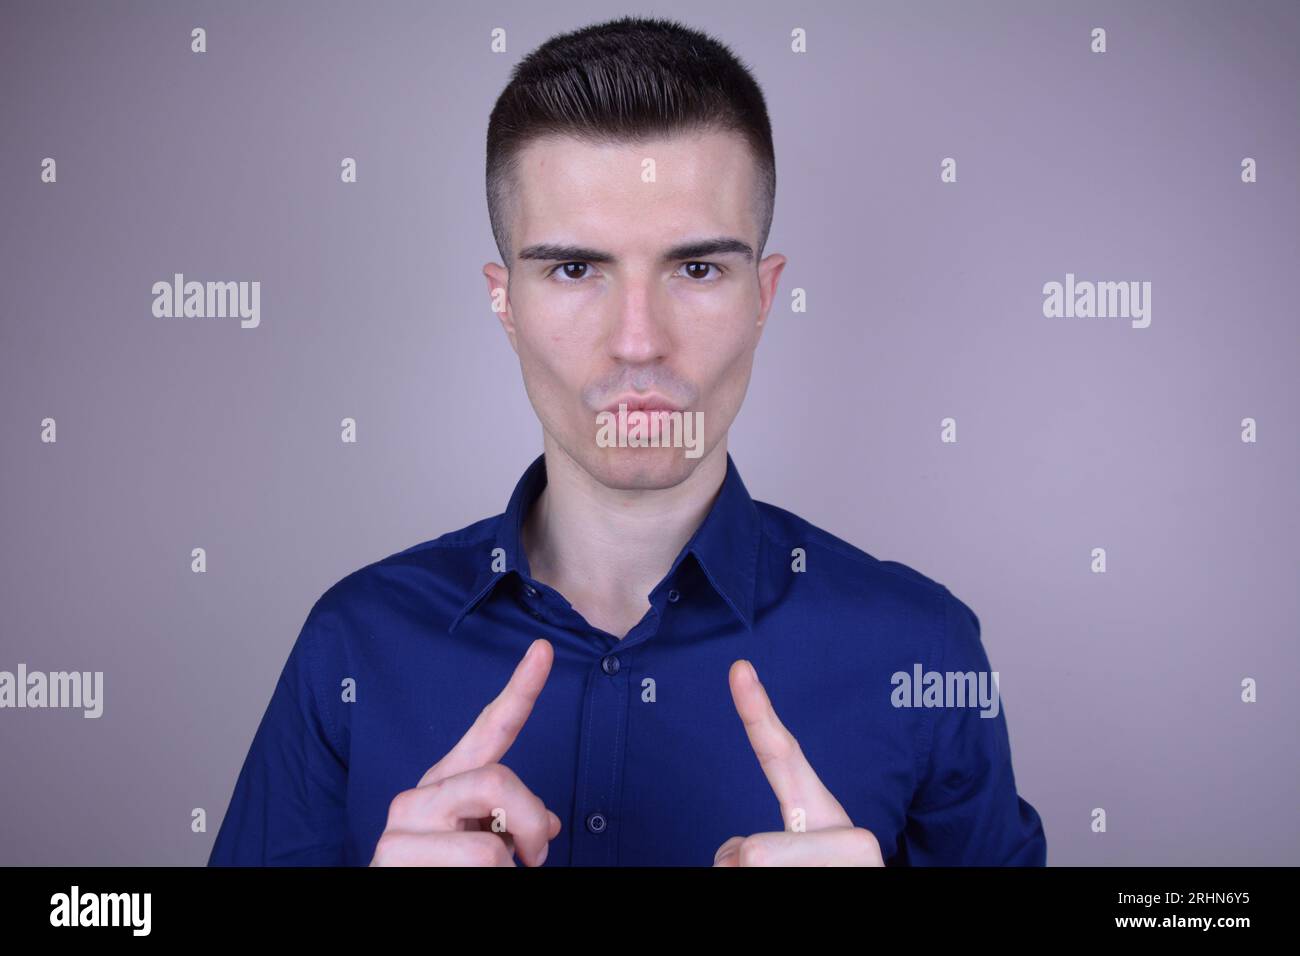 Overconfident Handsome Young Elegant Caucasian Man Pointing to Himself on Isolated Background Stock Photo